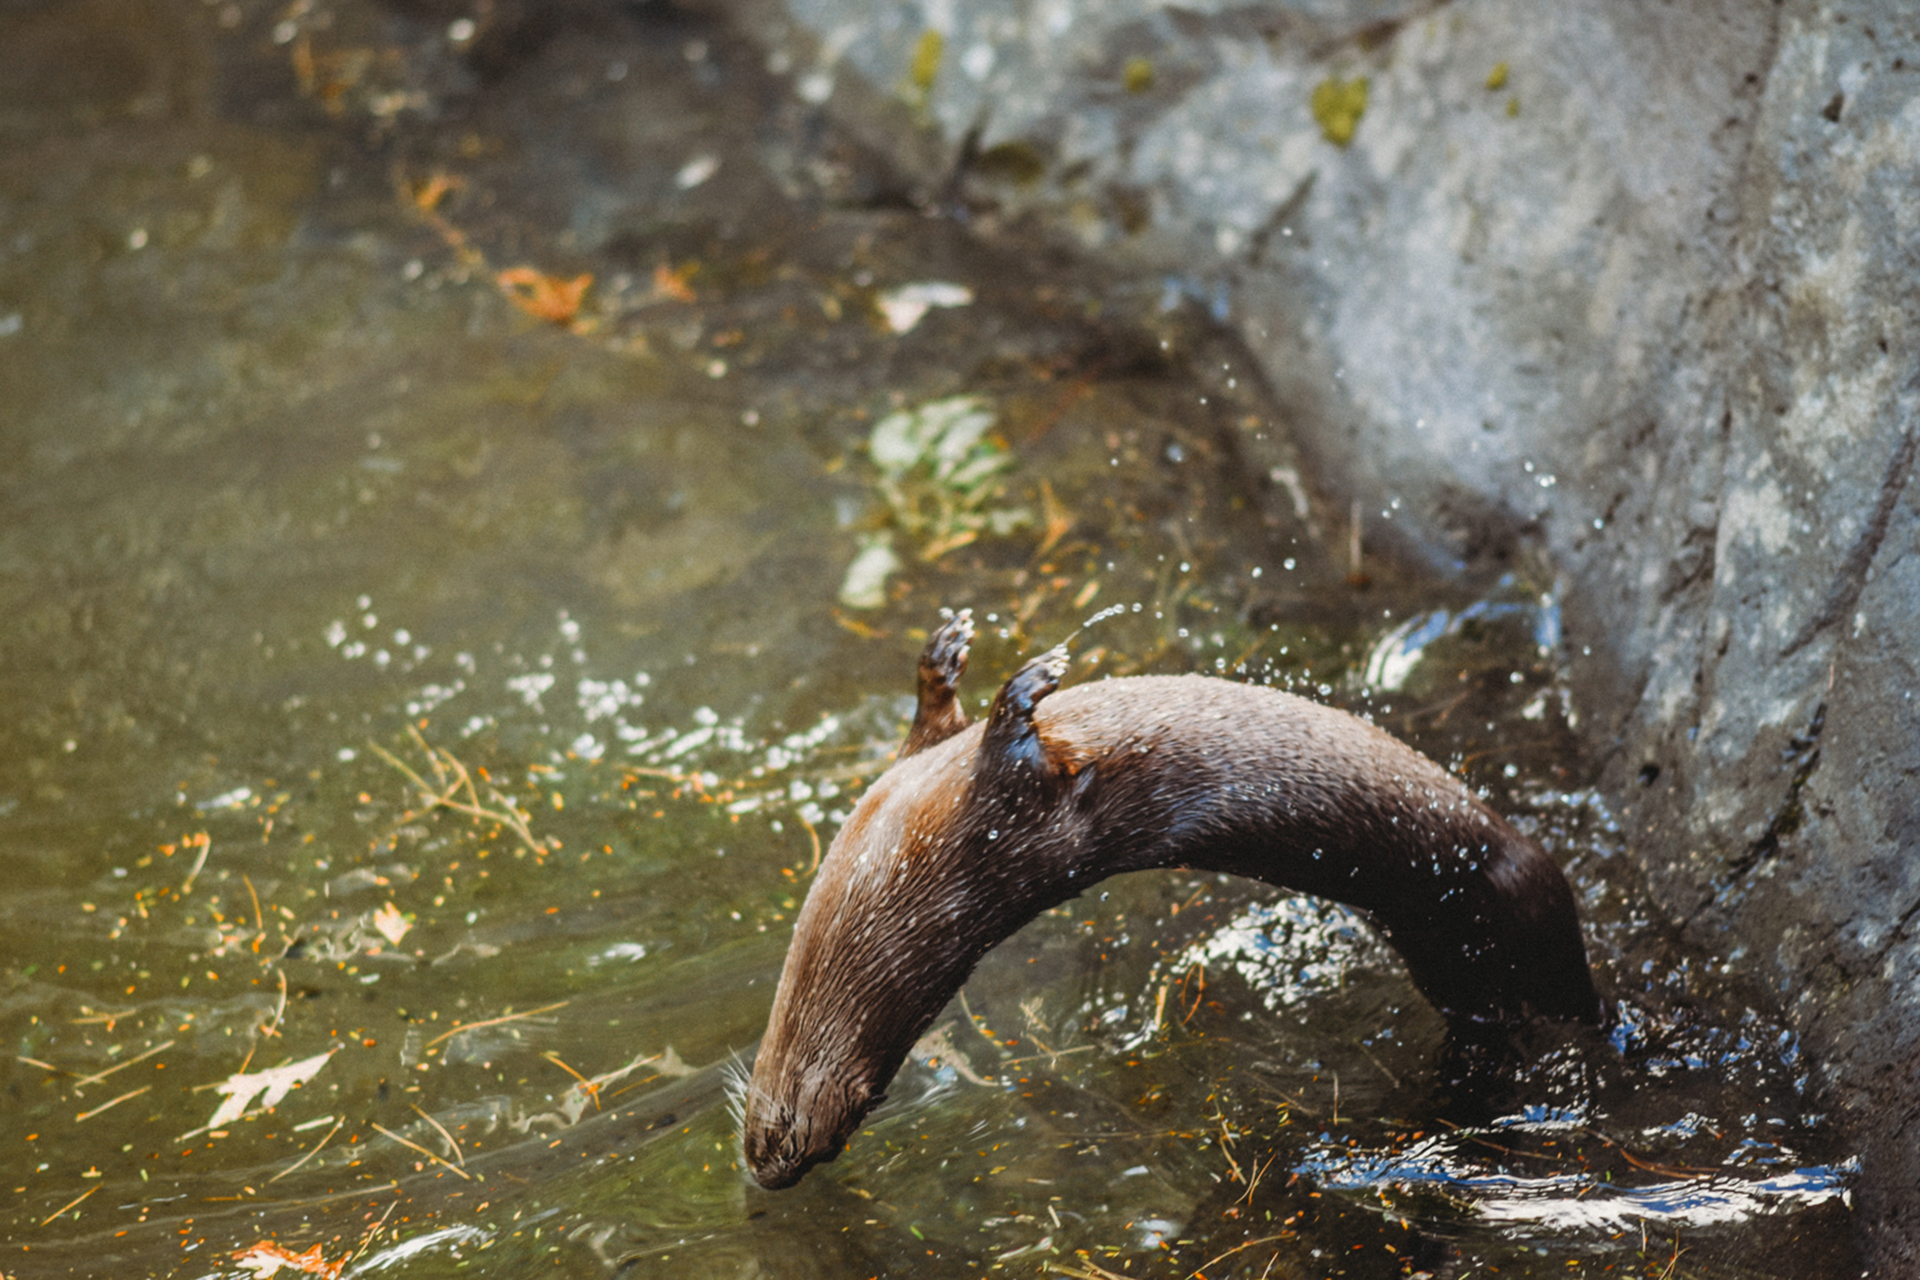 Otter, a North American River Otter, backflipping into the water off a rock wall